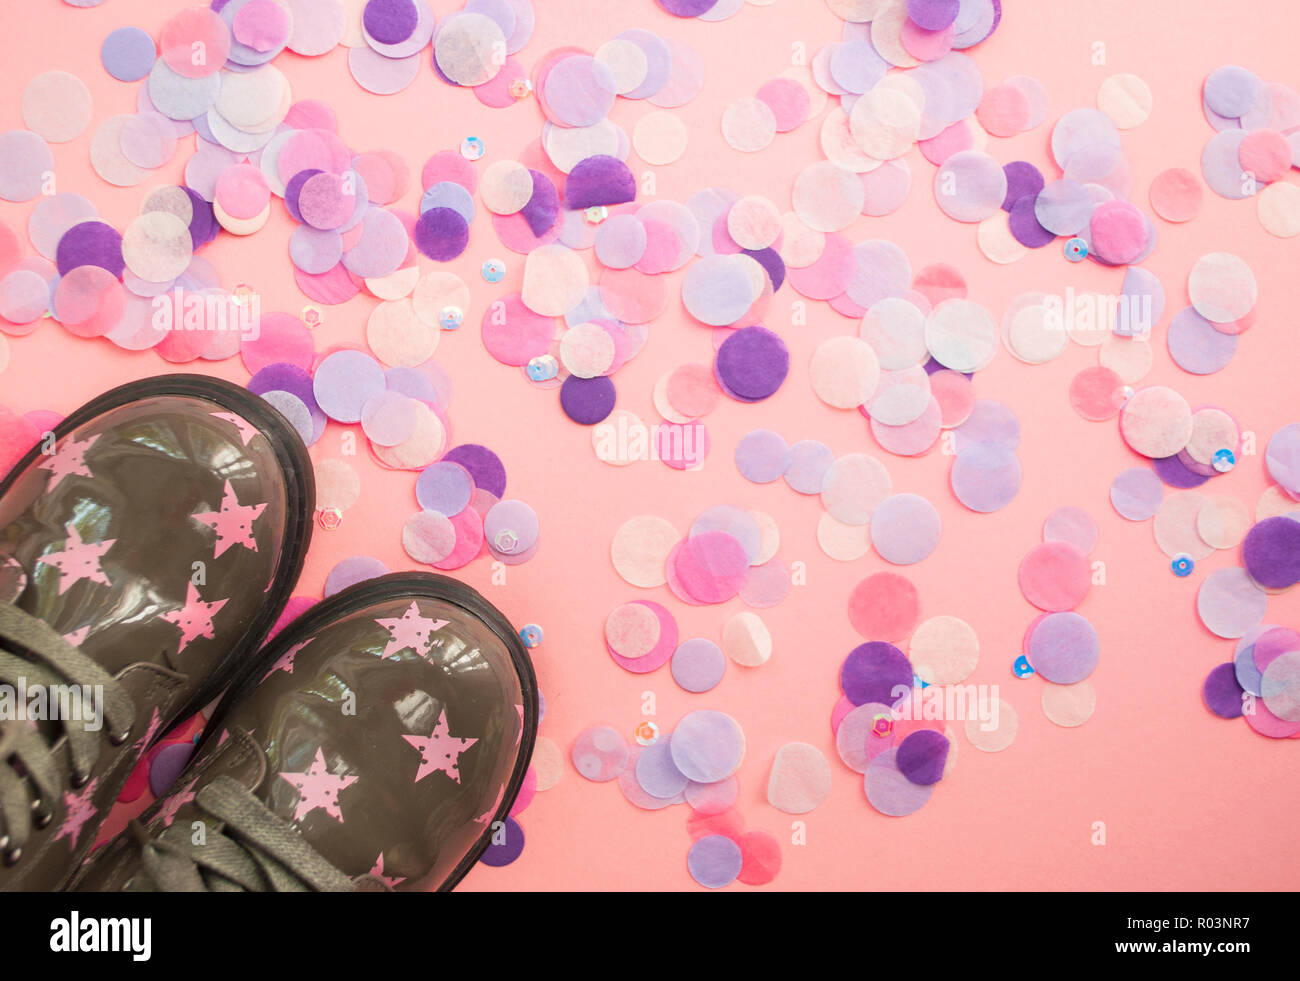 Cute child's green color shoes with star print on pink background with colorful confetti. Stock Photo